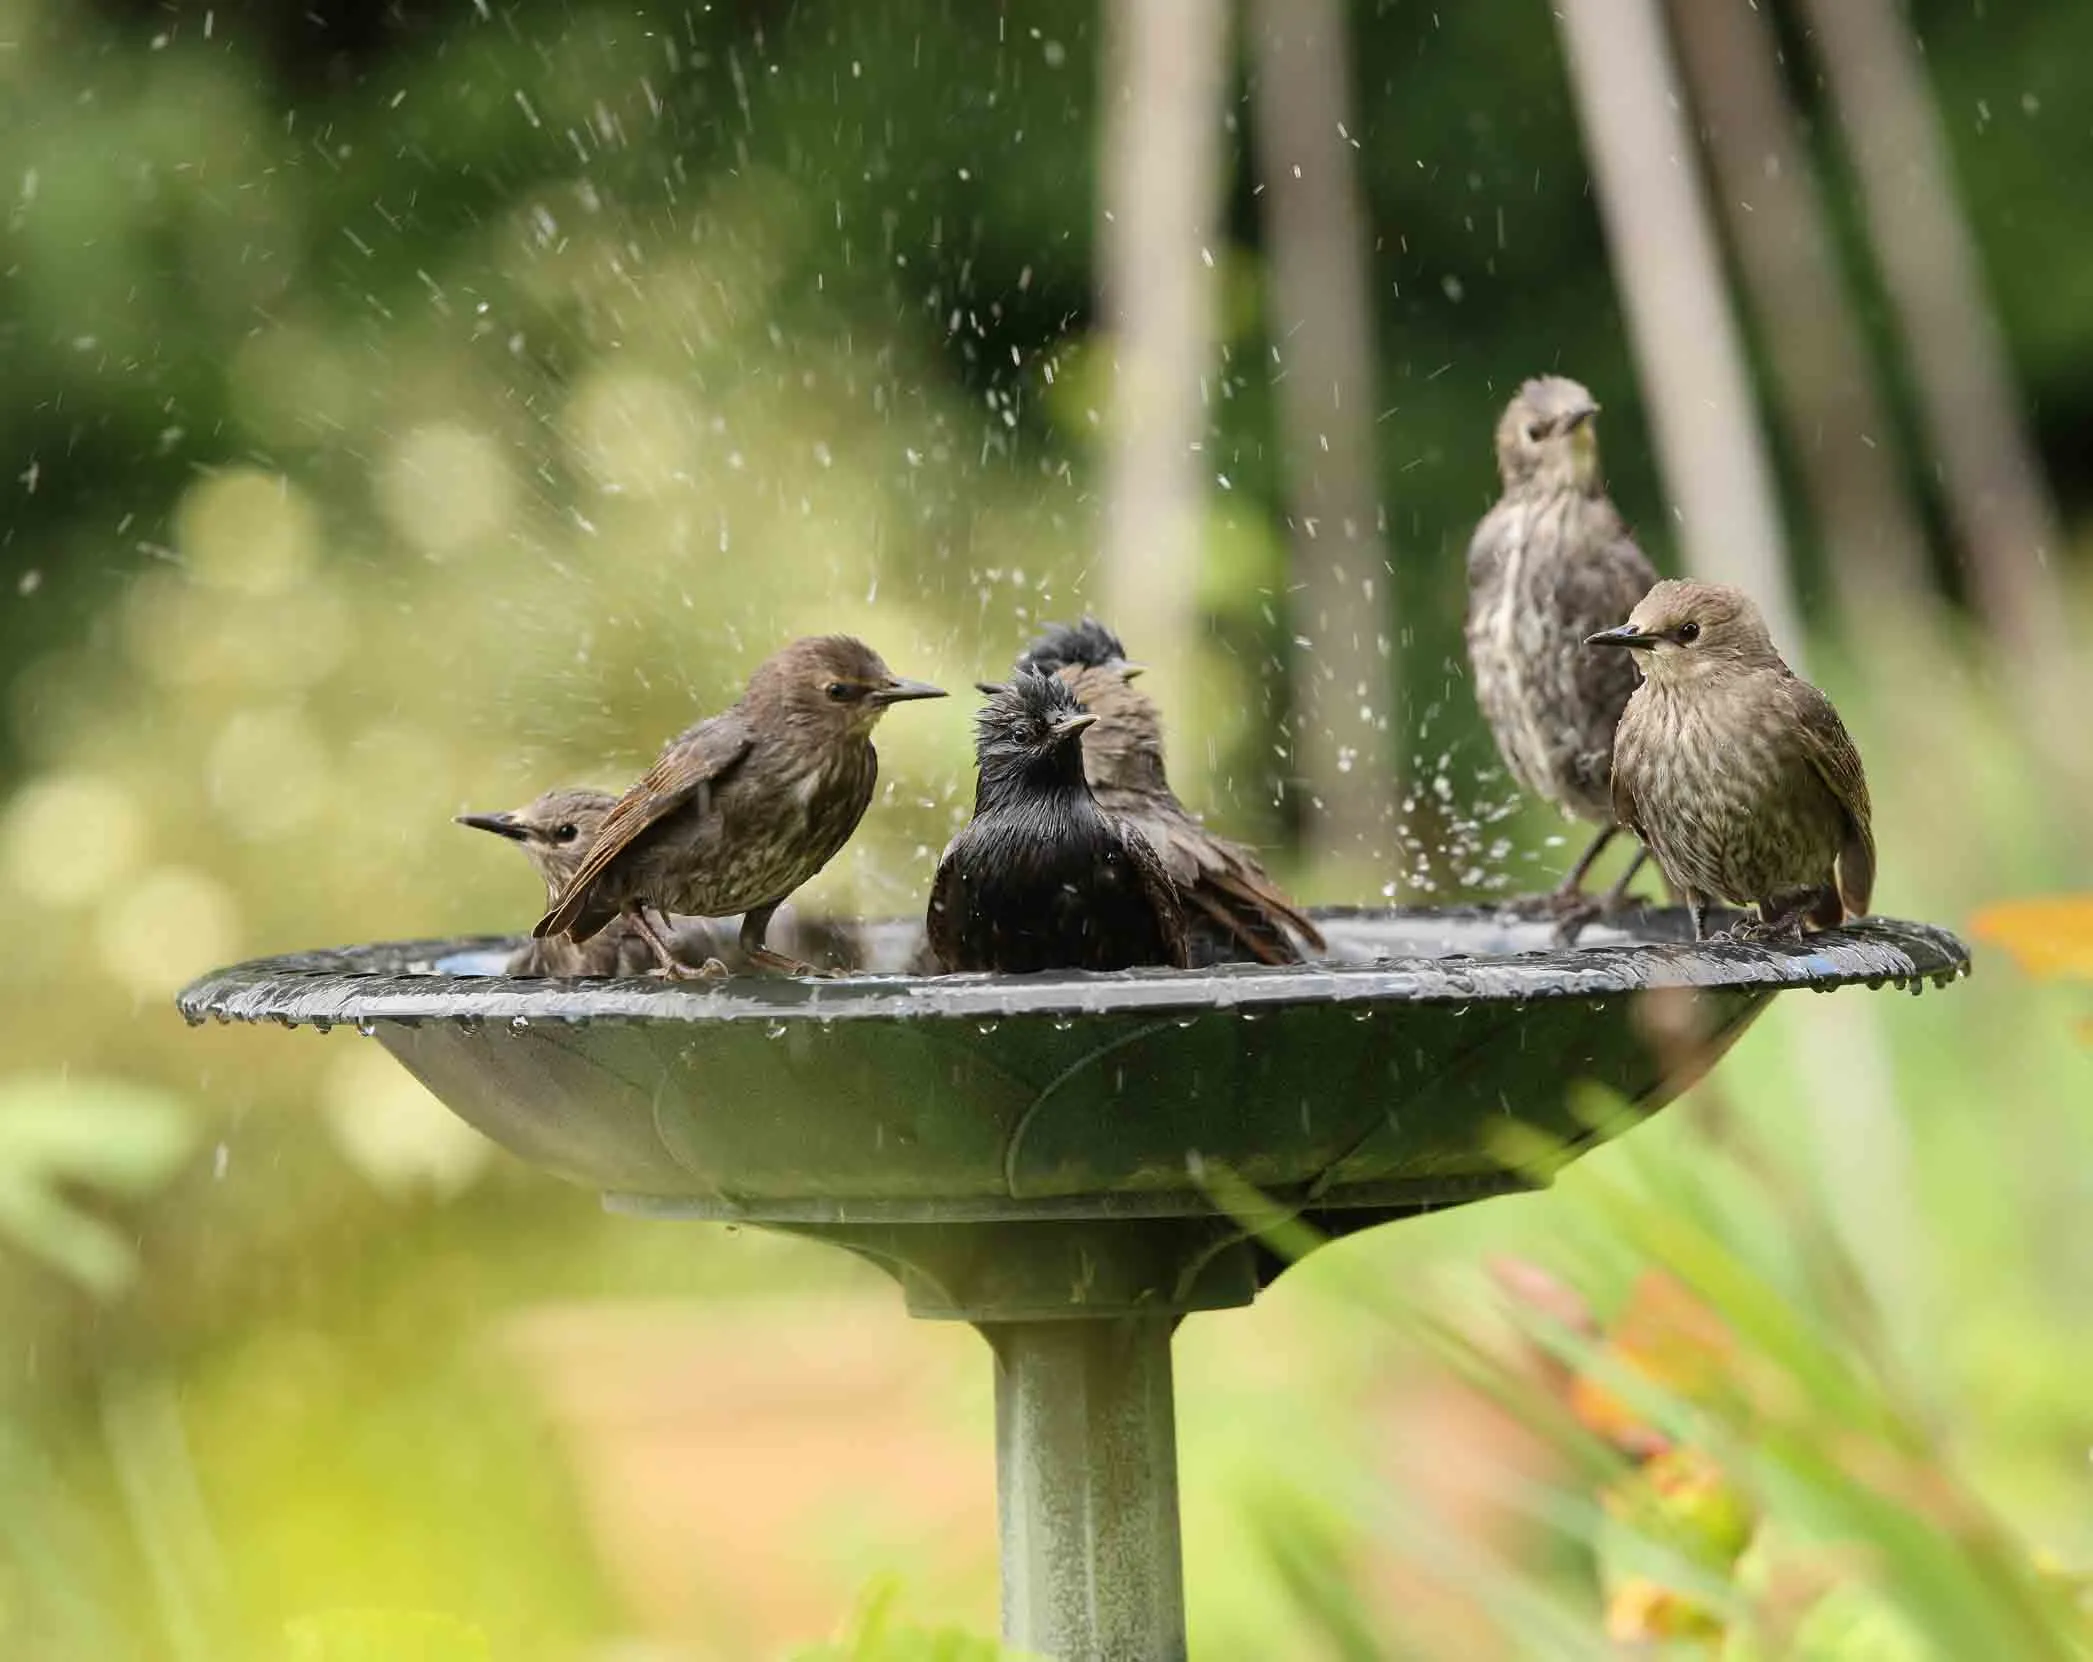 A group of Starlings washing in a birdbath surrounded by greenery.